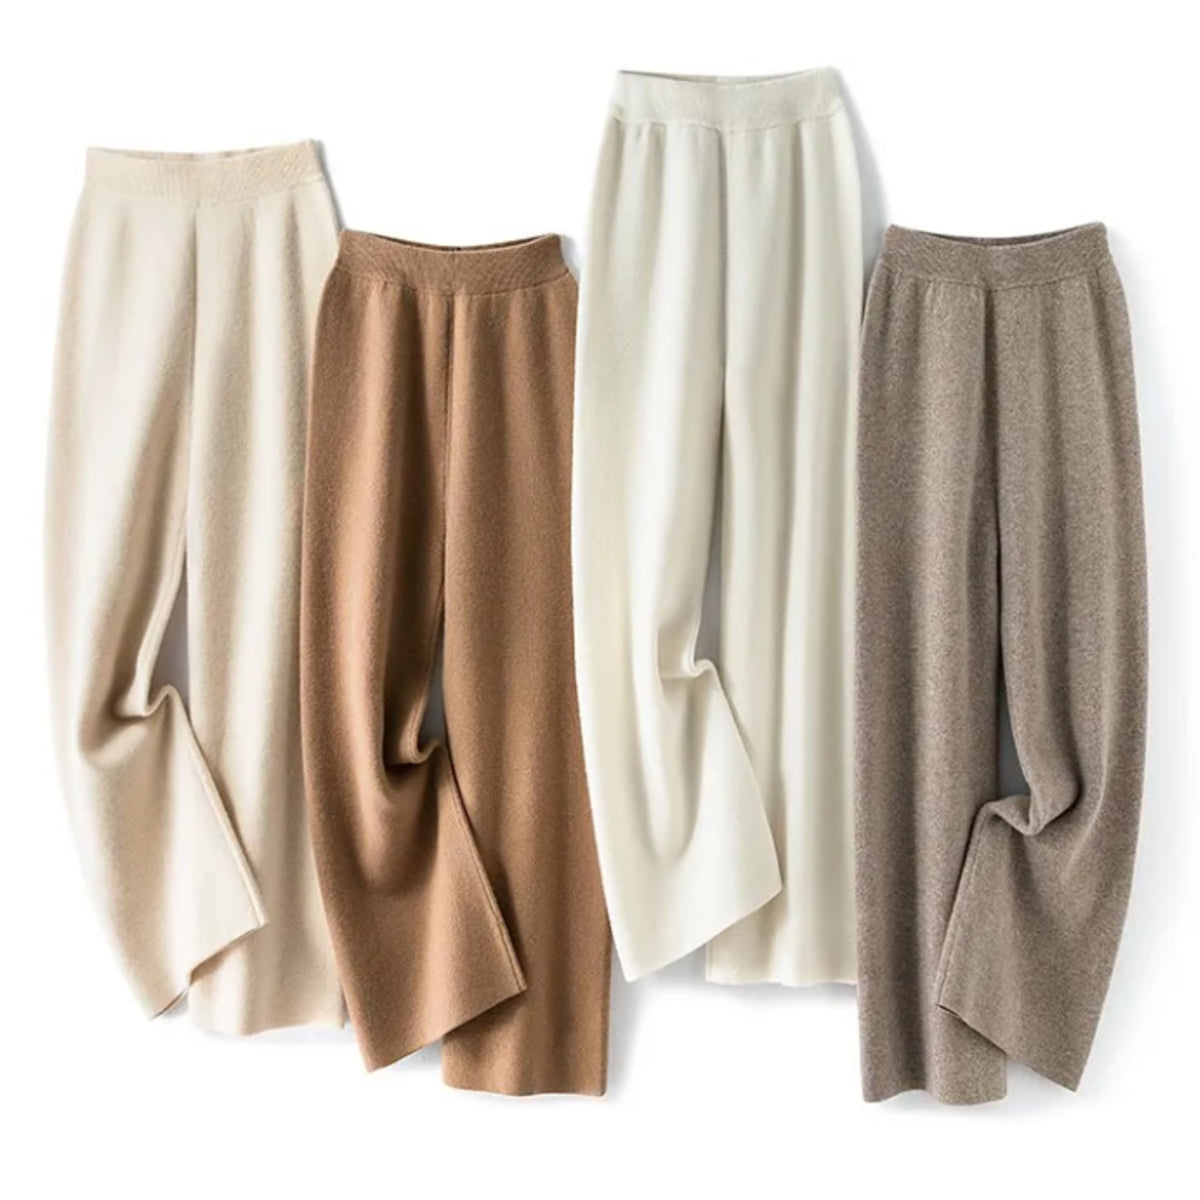 luxurious cashmere lounge pants in four neutral colors